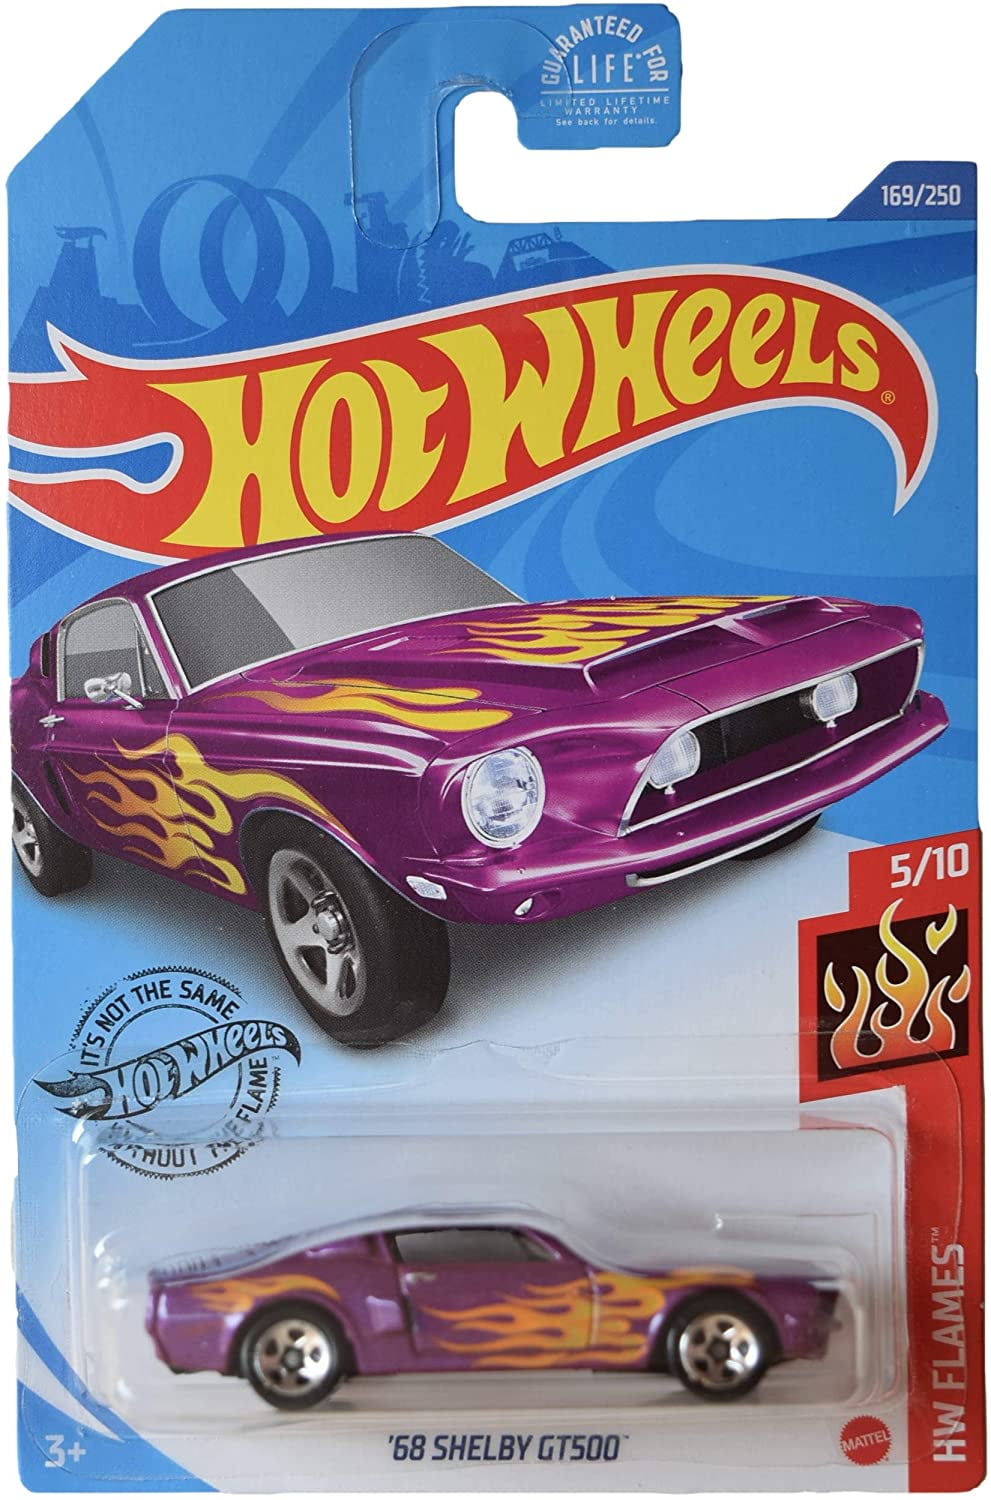 SELECTION 3 Details about   Hot Wheels  Cars *CHOOSE YOUR FAVOURITE* New/Sealed